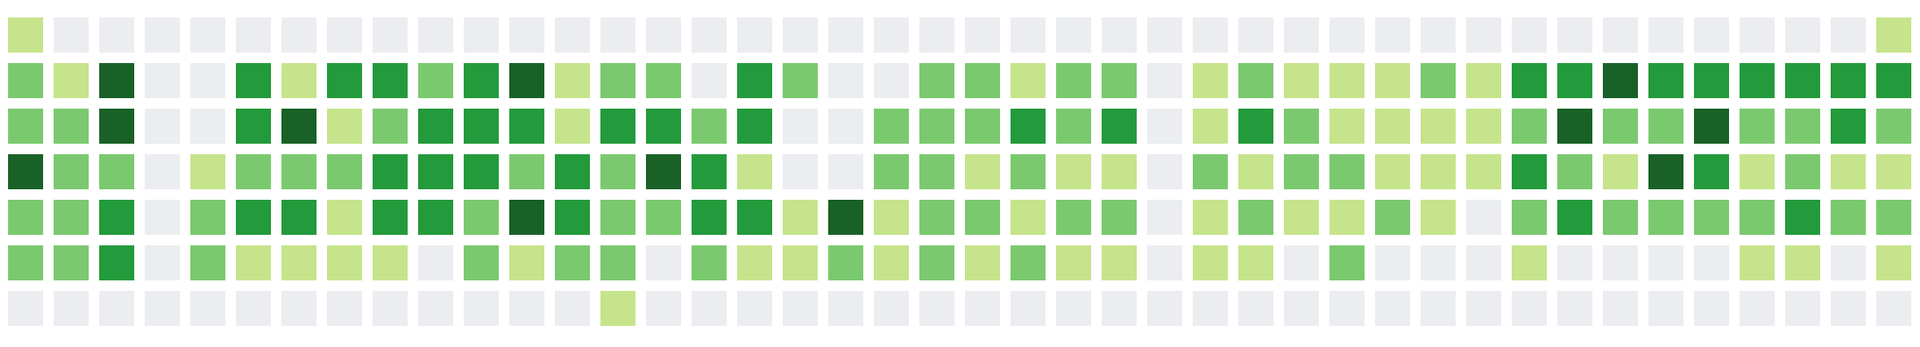 What I see in Github contributions cover image